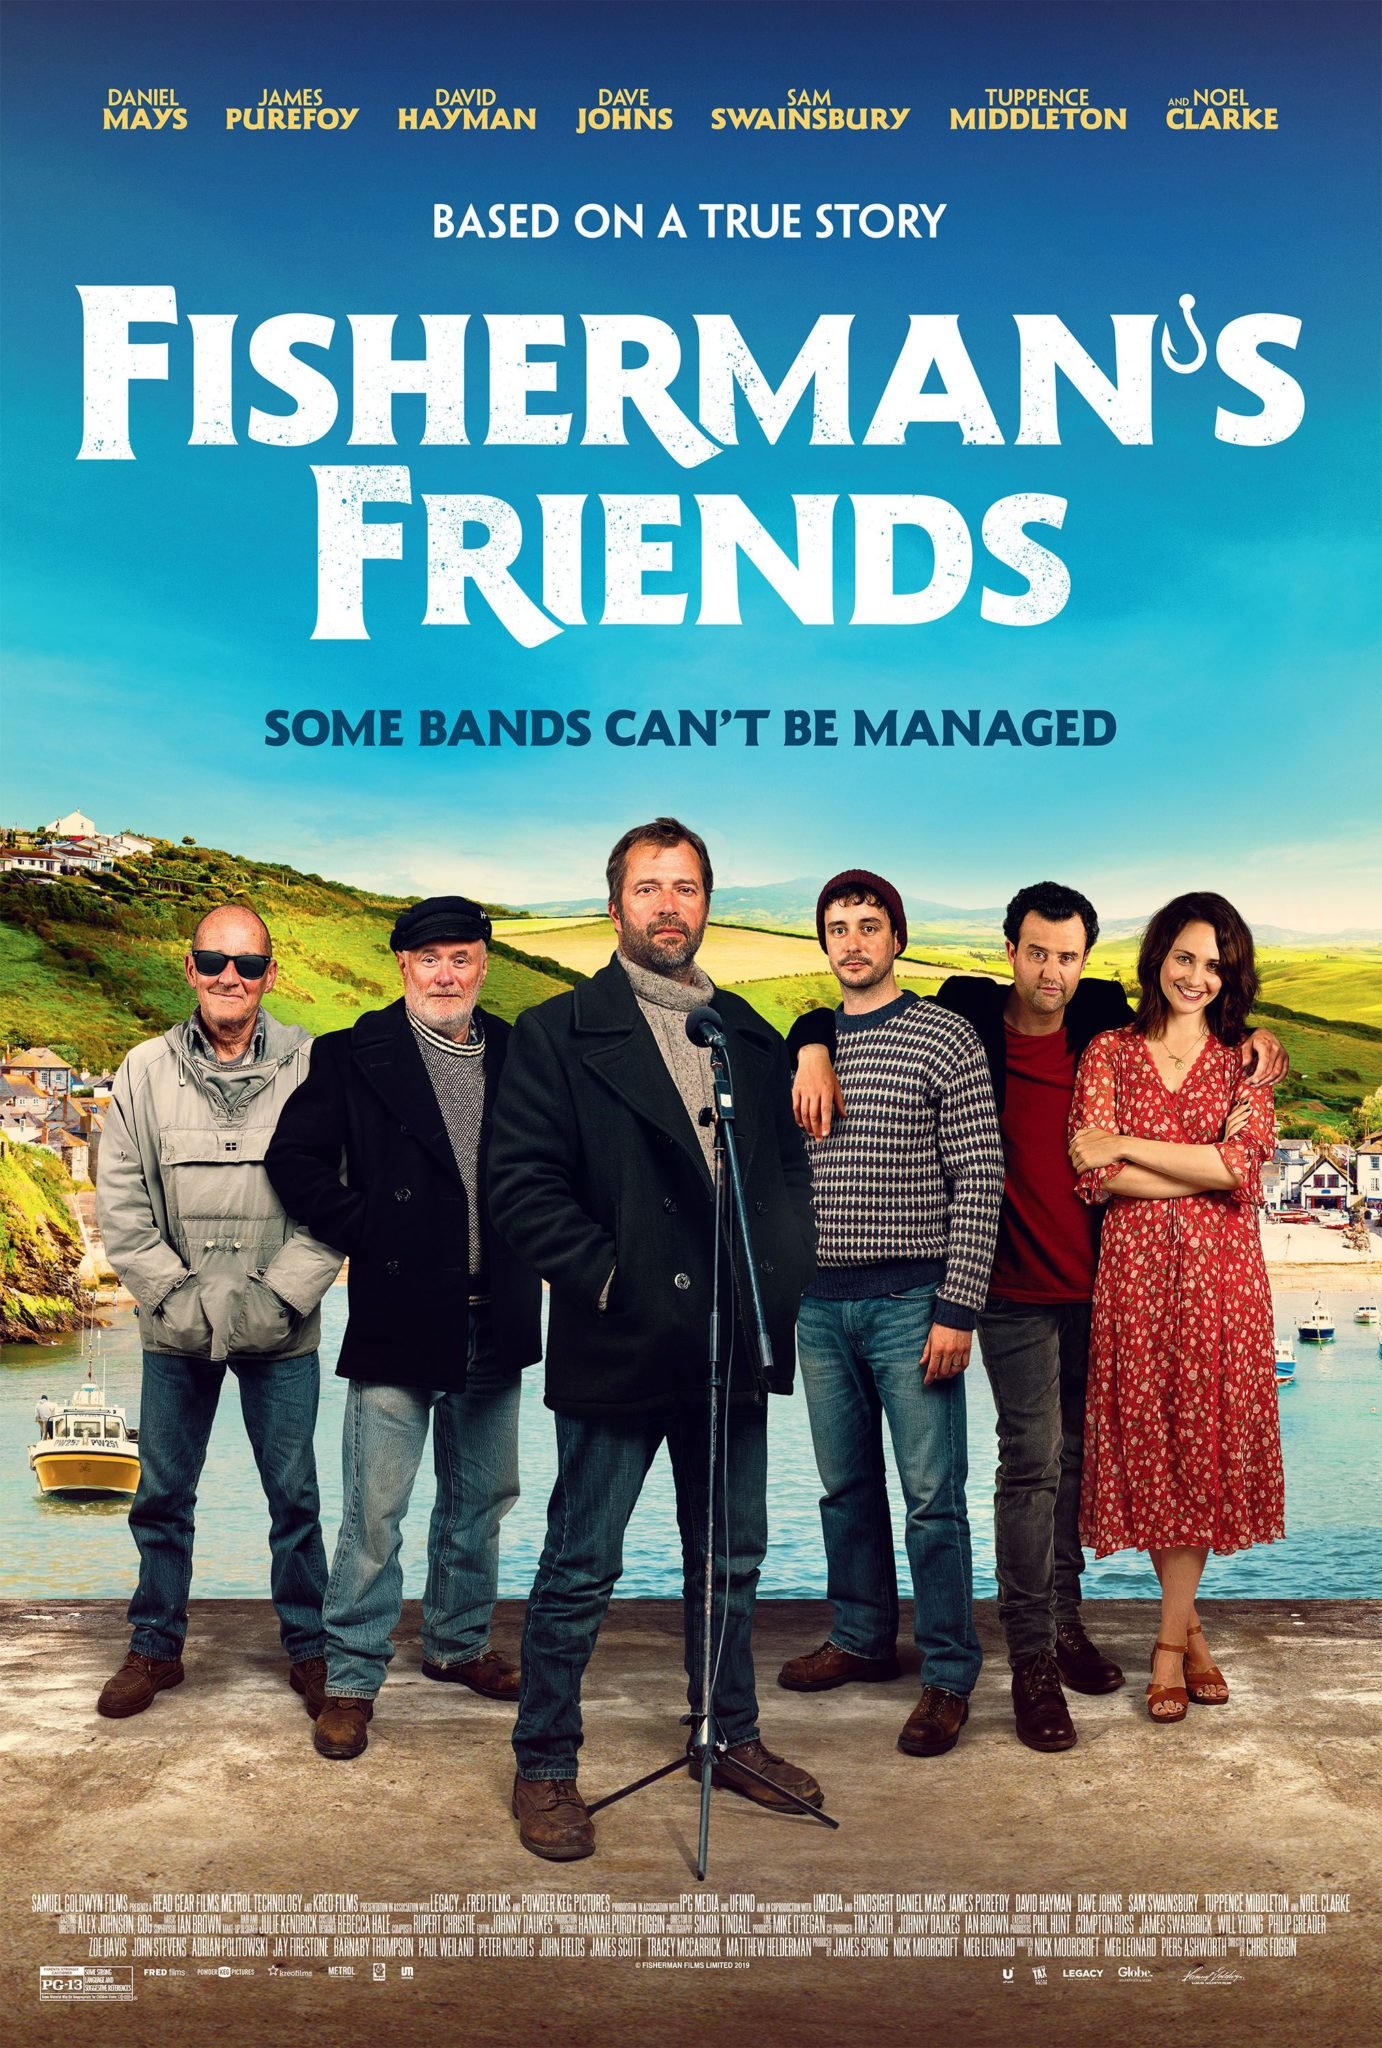 Fisherman’s Friends Movie Review